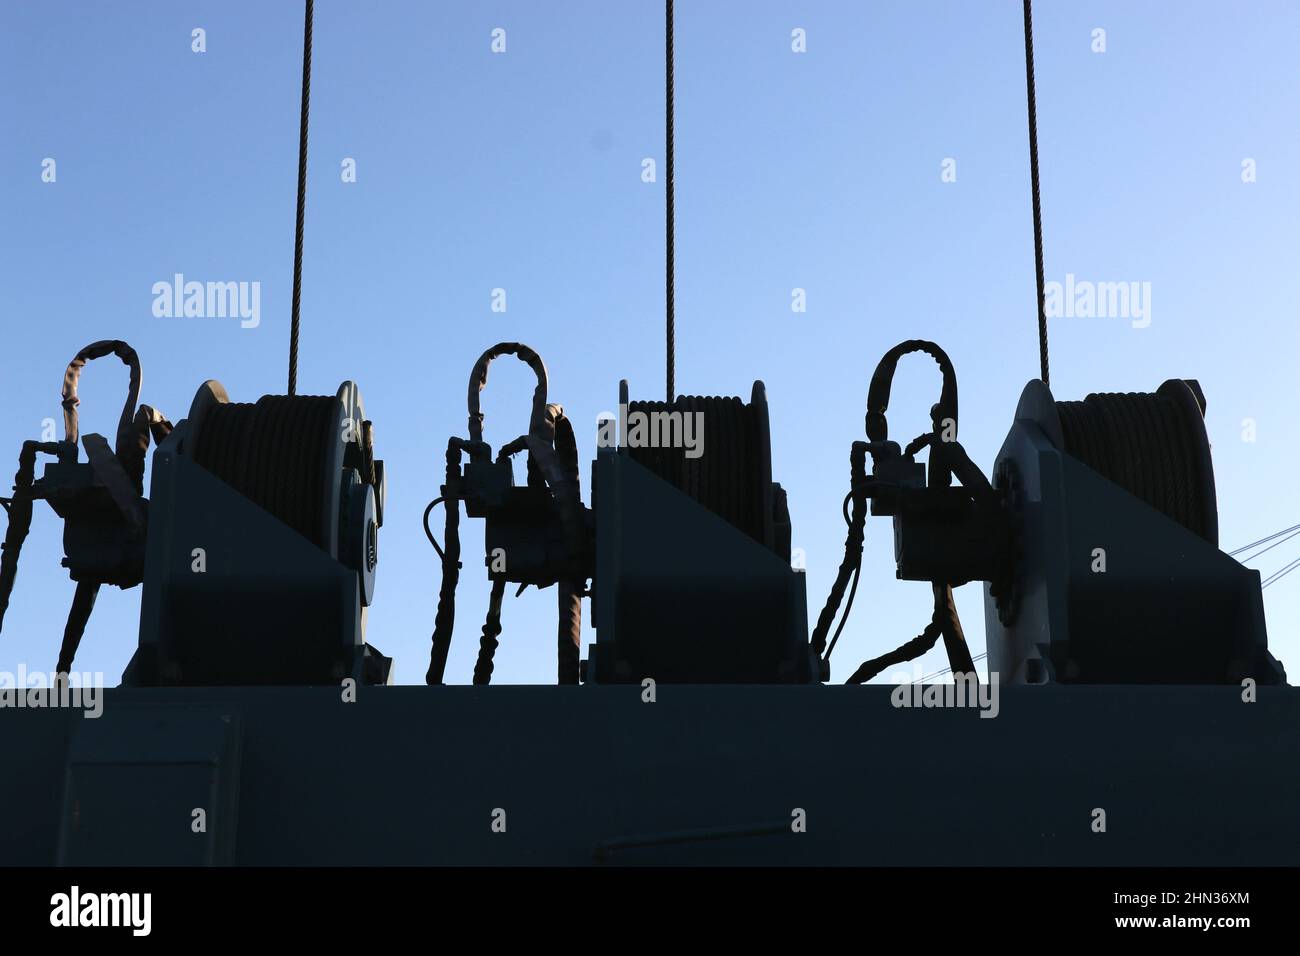 Silhouette of three boat winches,  Monterey Bay harbor, CA. Powerful pulley systems used in the boating industry. Stock Photo